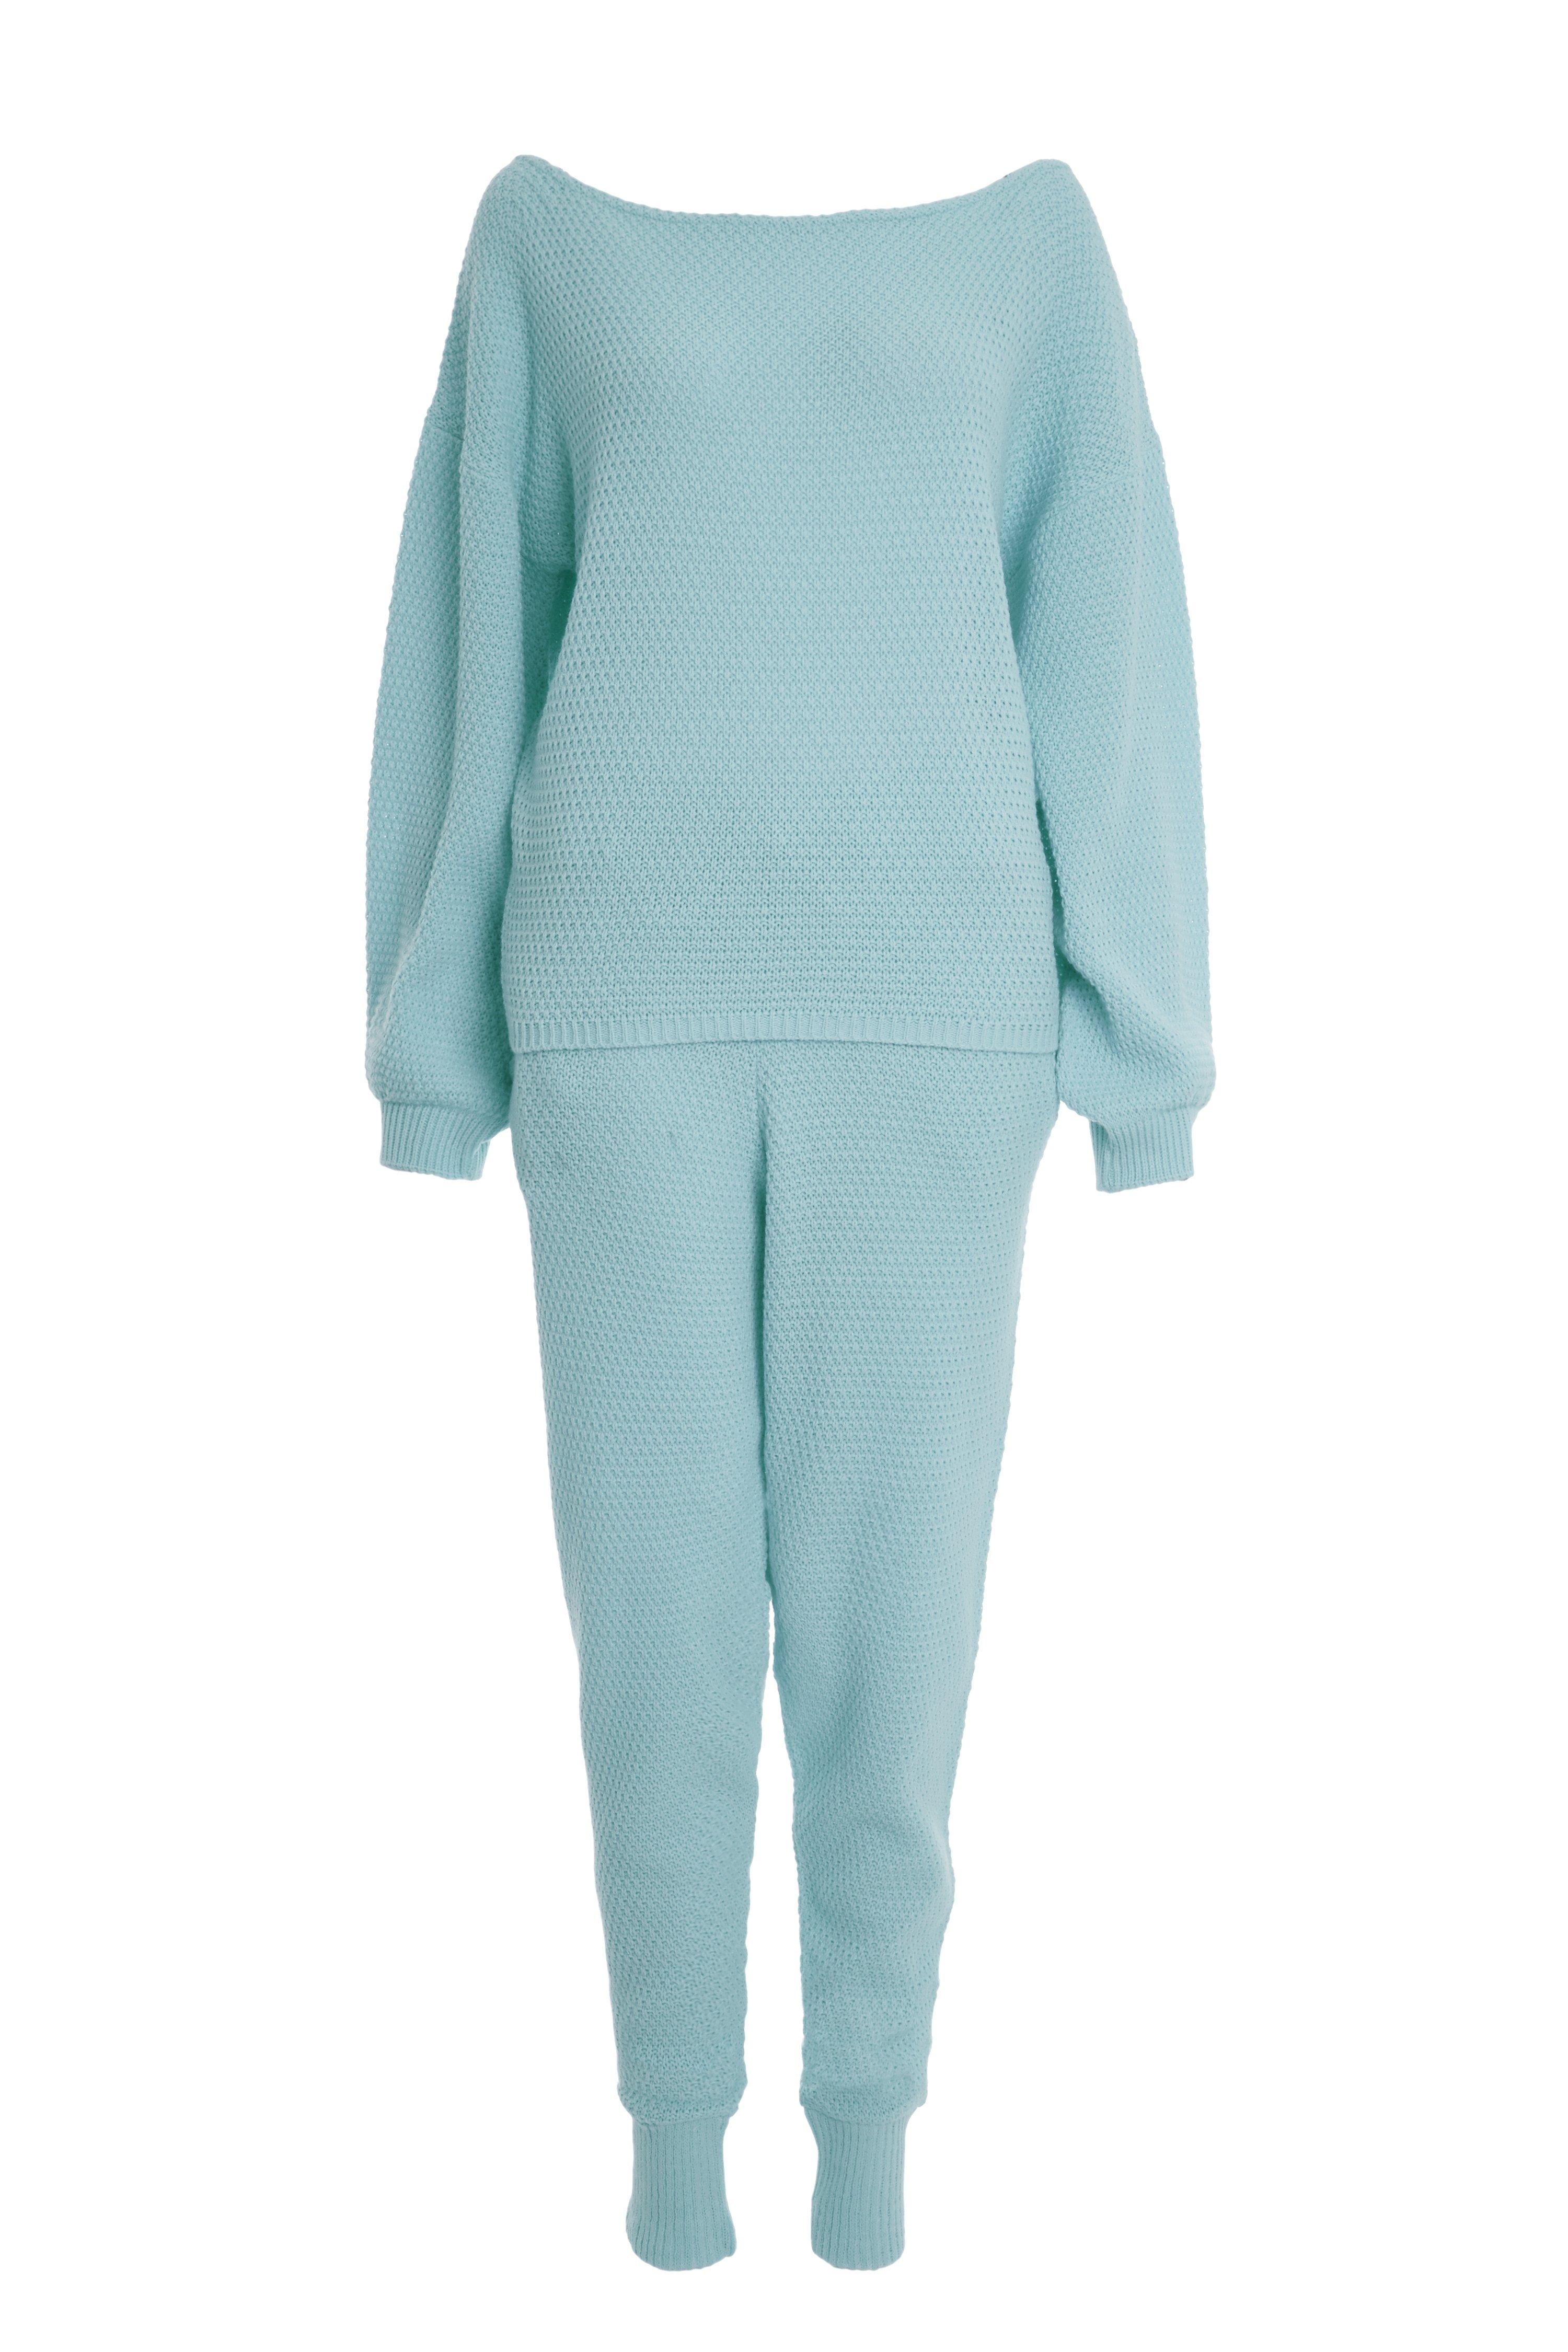 Mint Knitted Lounge set - Quiz Clothing